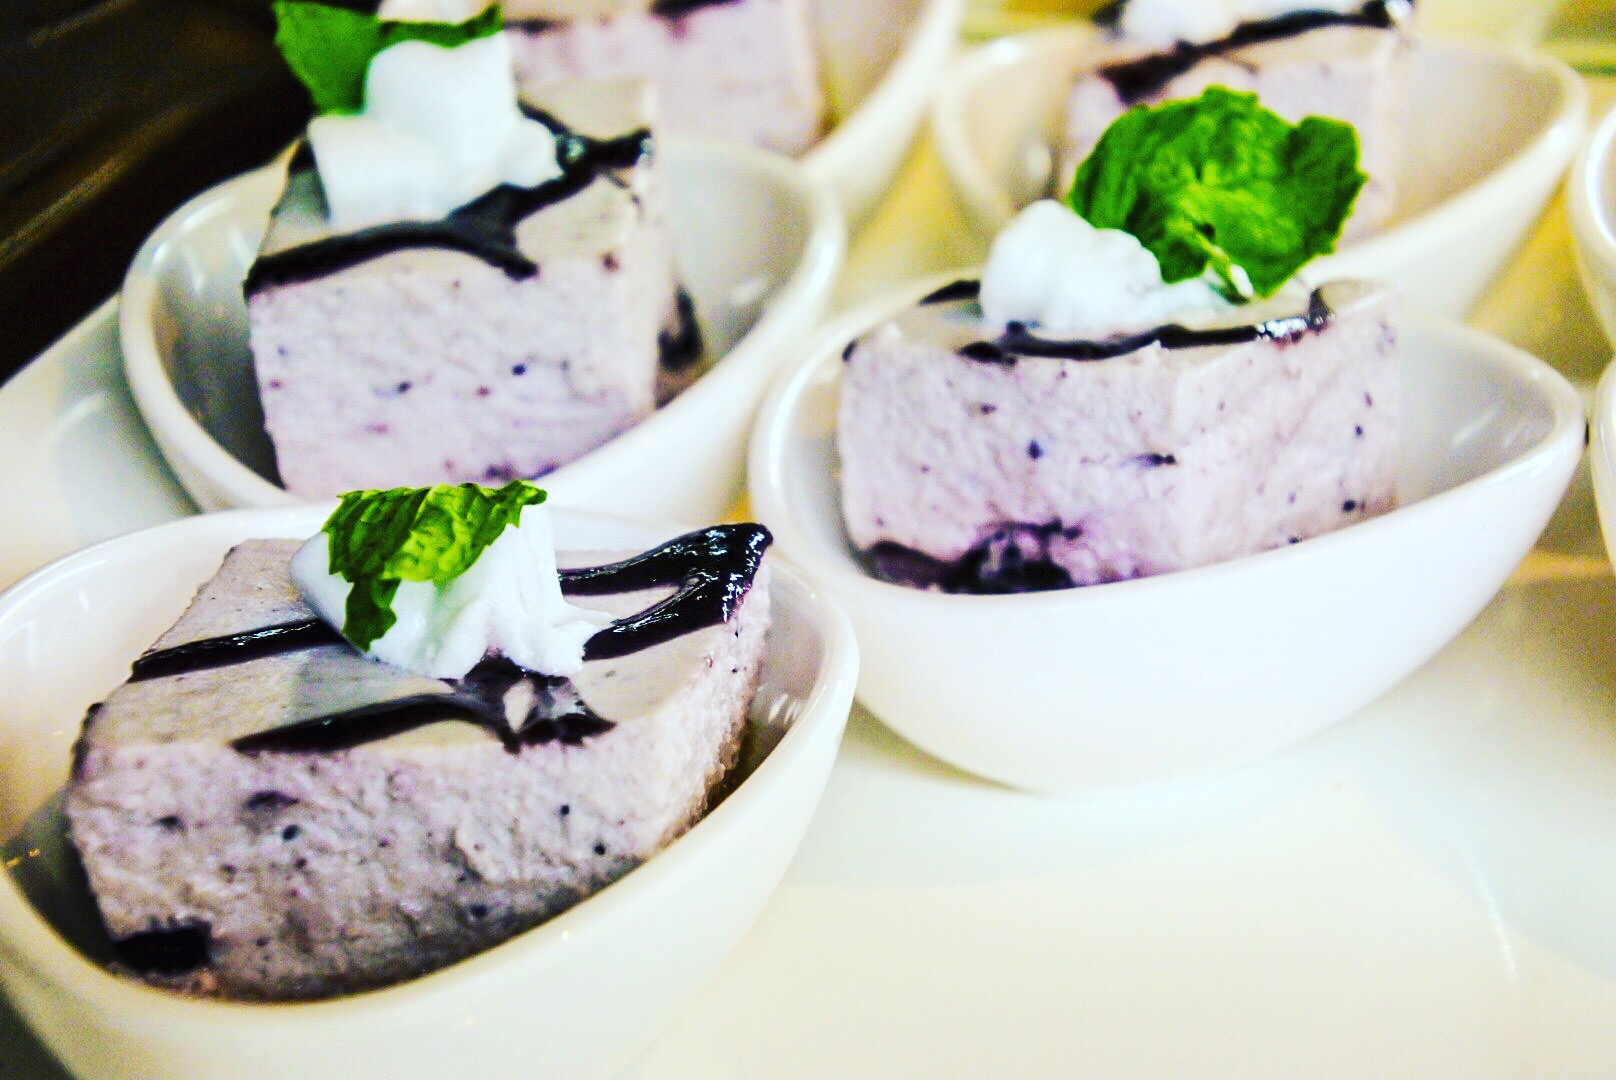 Blueberry cheesecakes on display